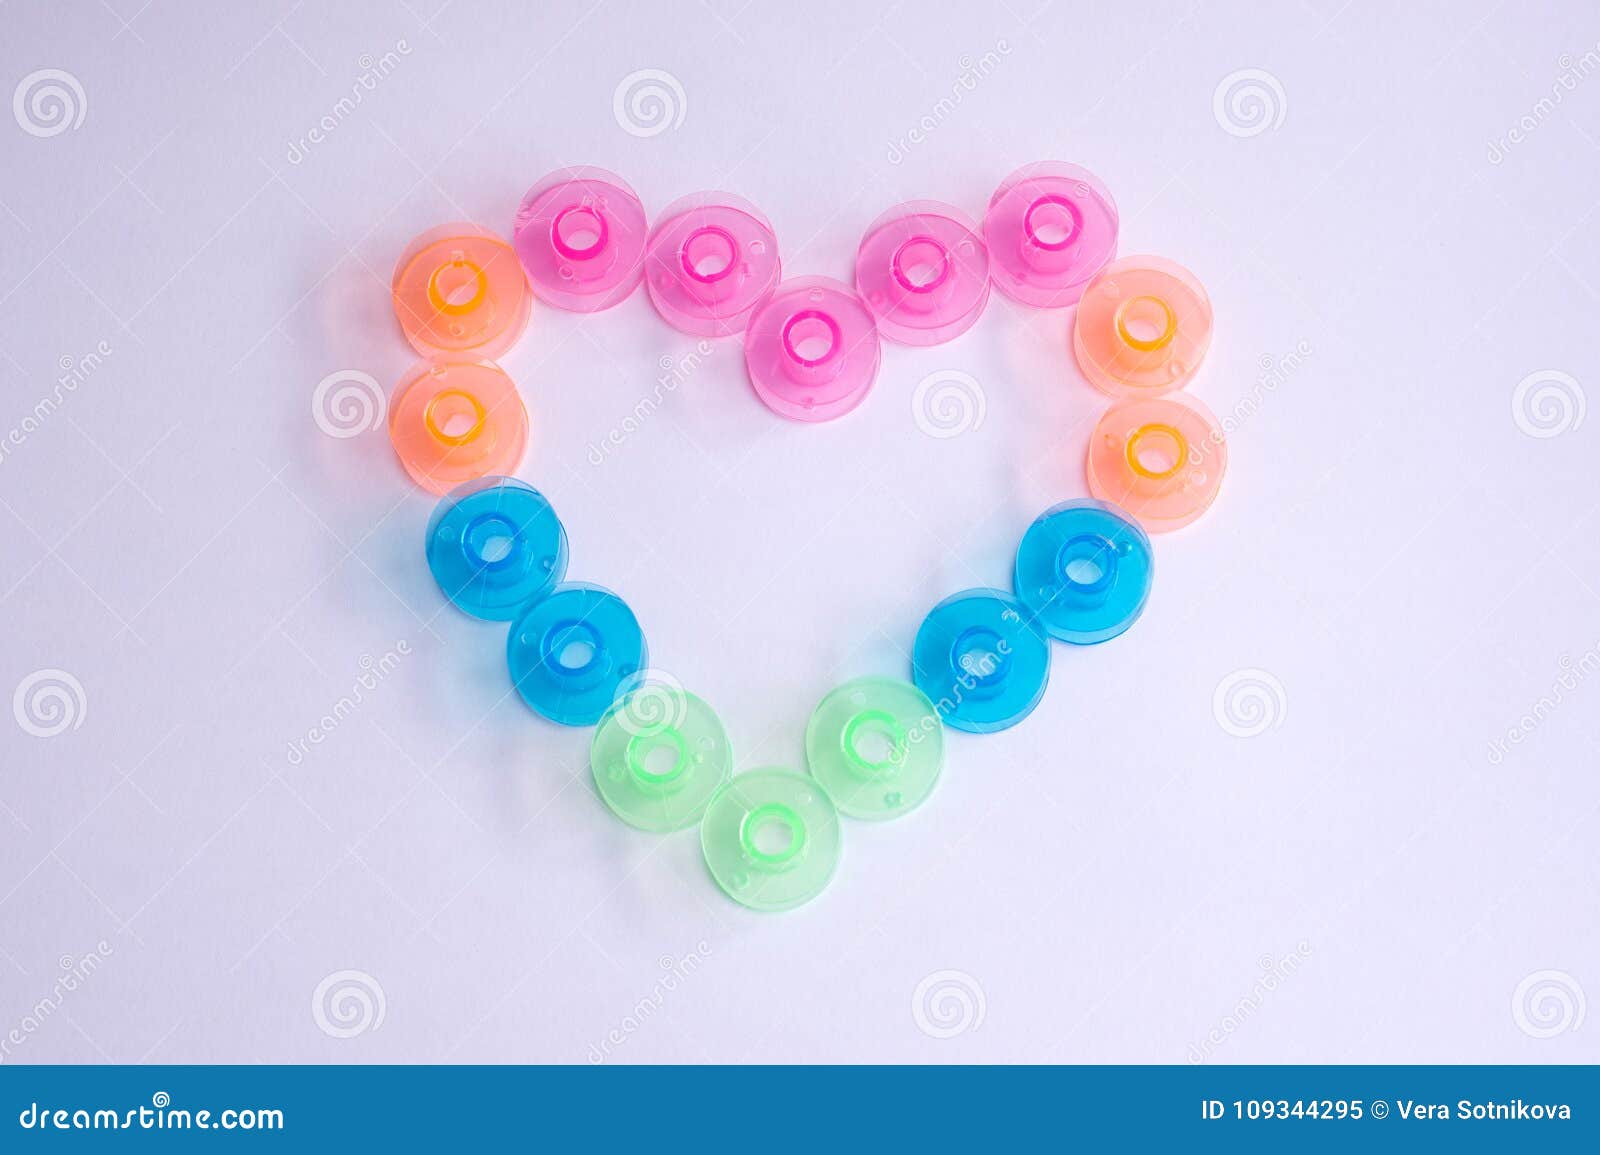 hearts from sewing colorful bobbins on white phonetics. valentin